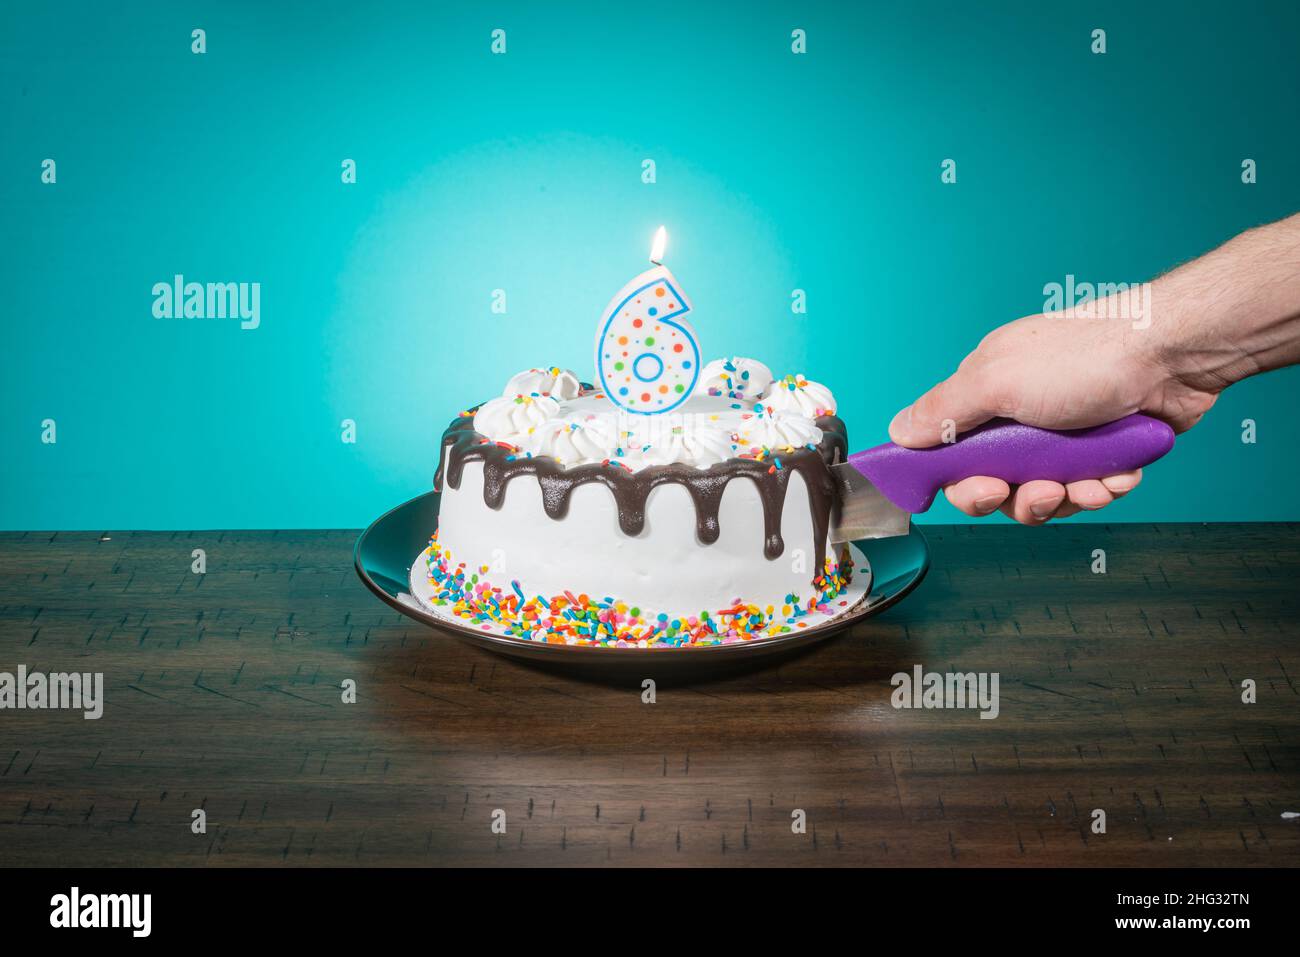 A birthday cake bears a candle in the shape of the number 6 while a hand cuts a slice. Stock Photo